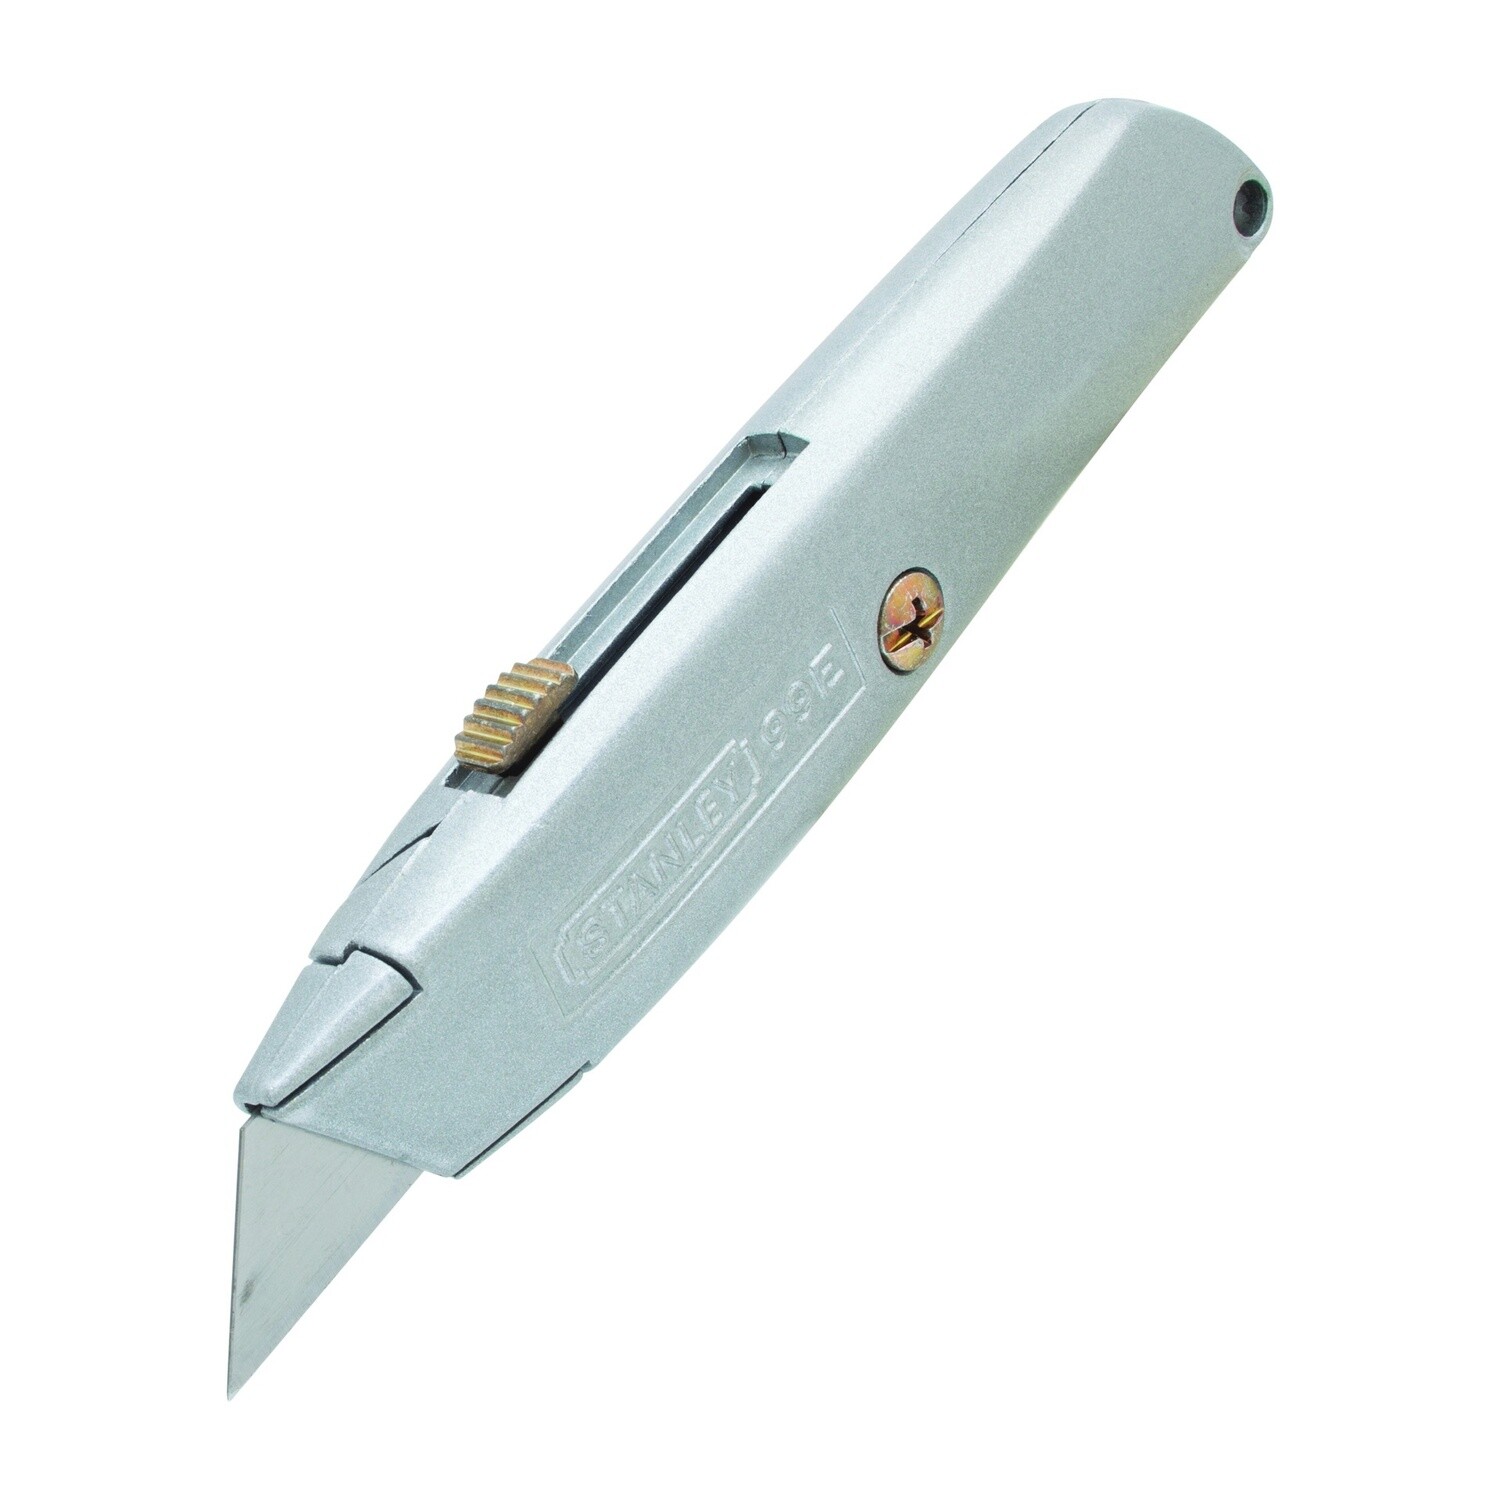 10-099 CLASSIC 99 RETRACTABLE UTILITY KNIFE